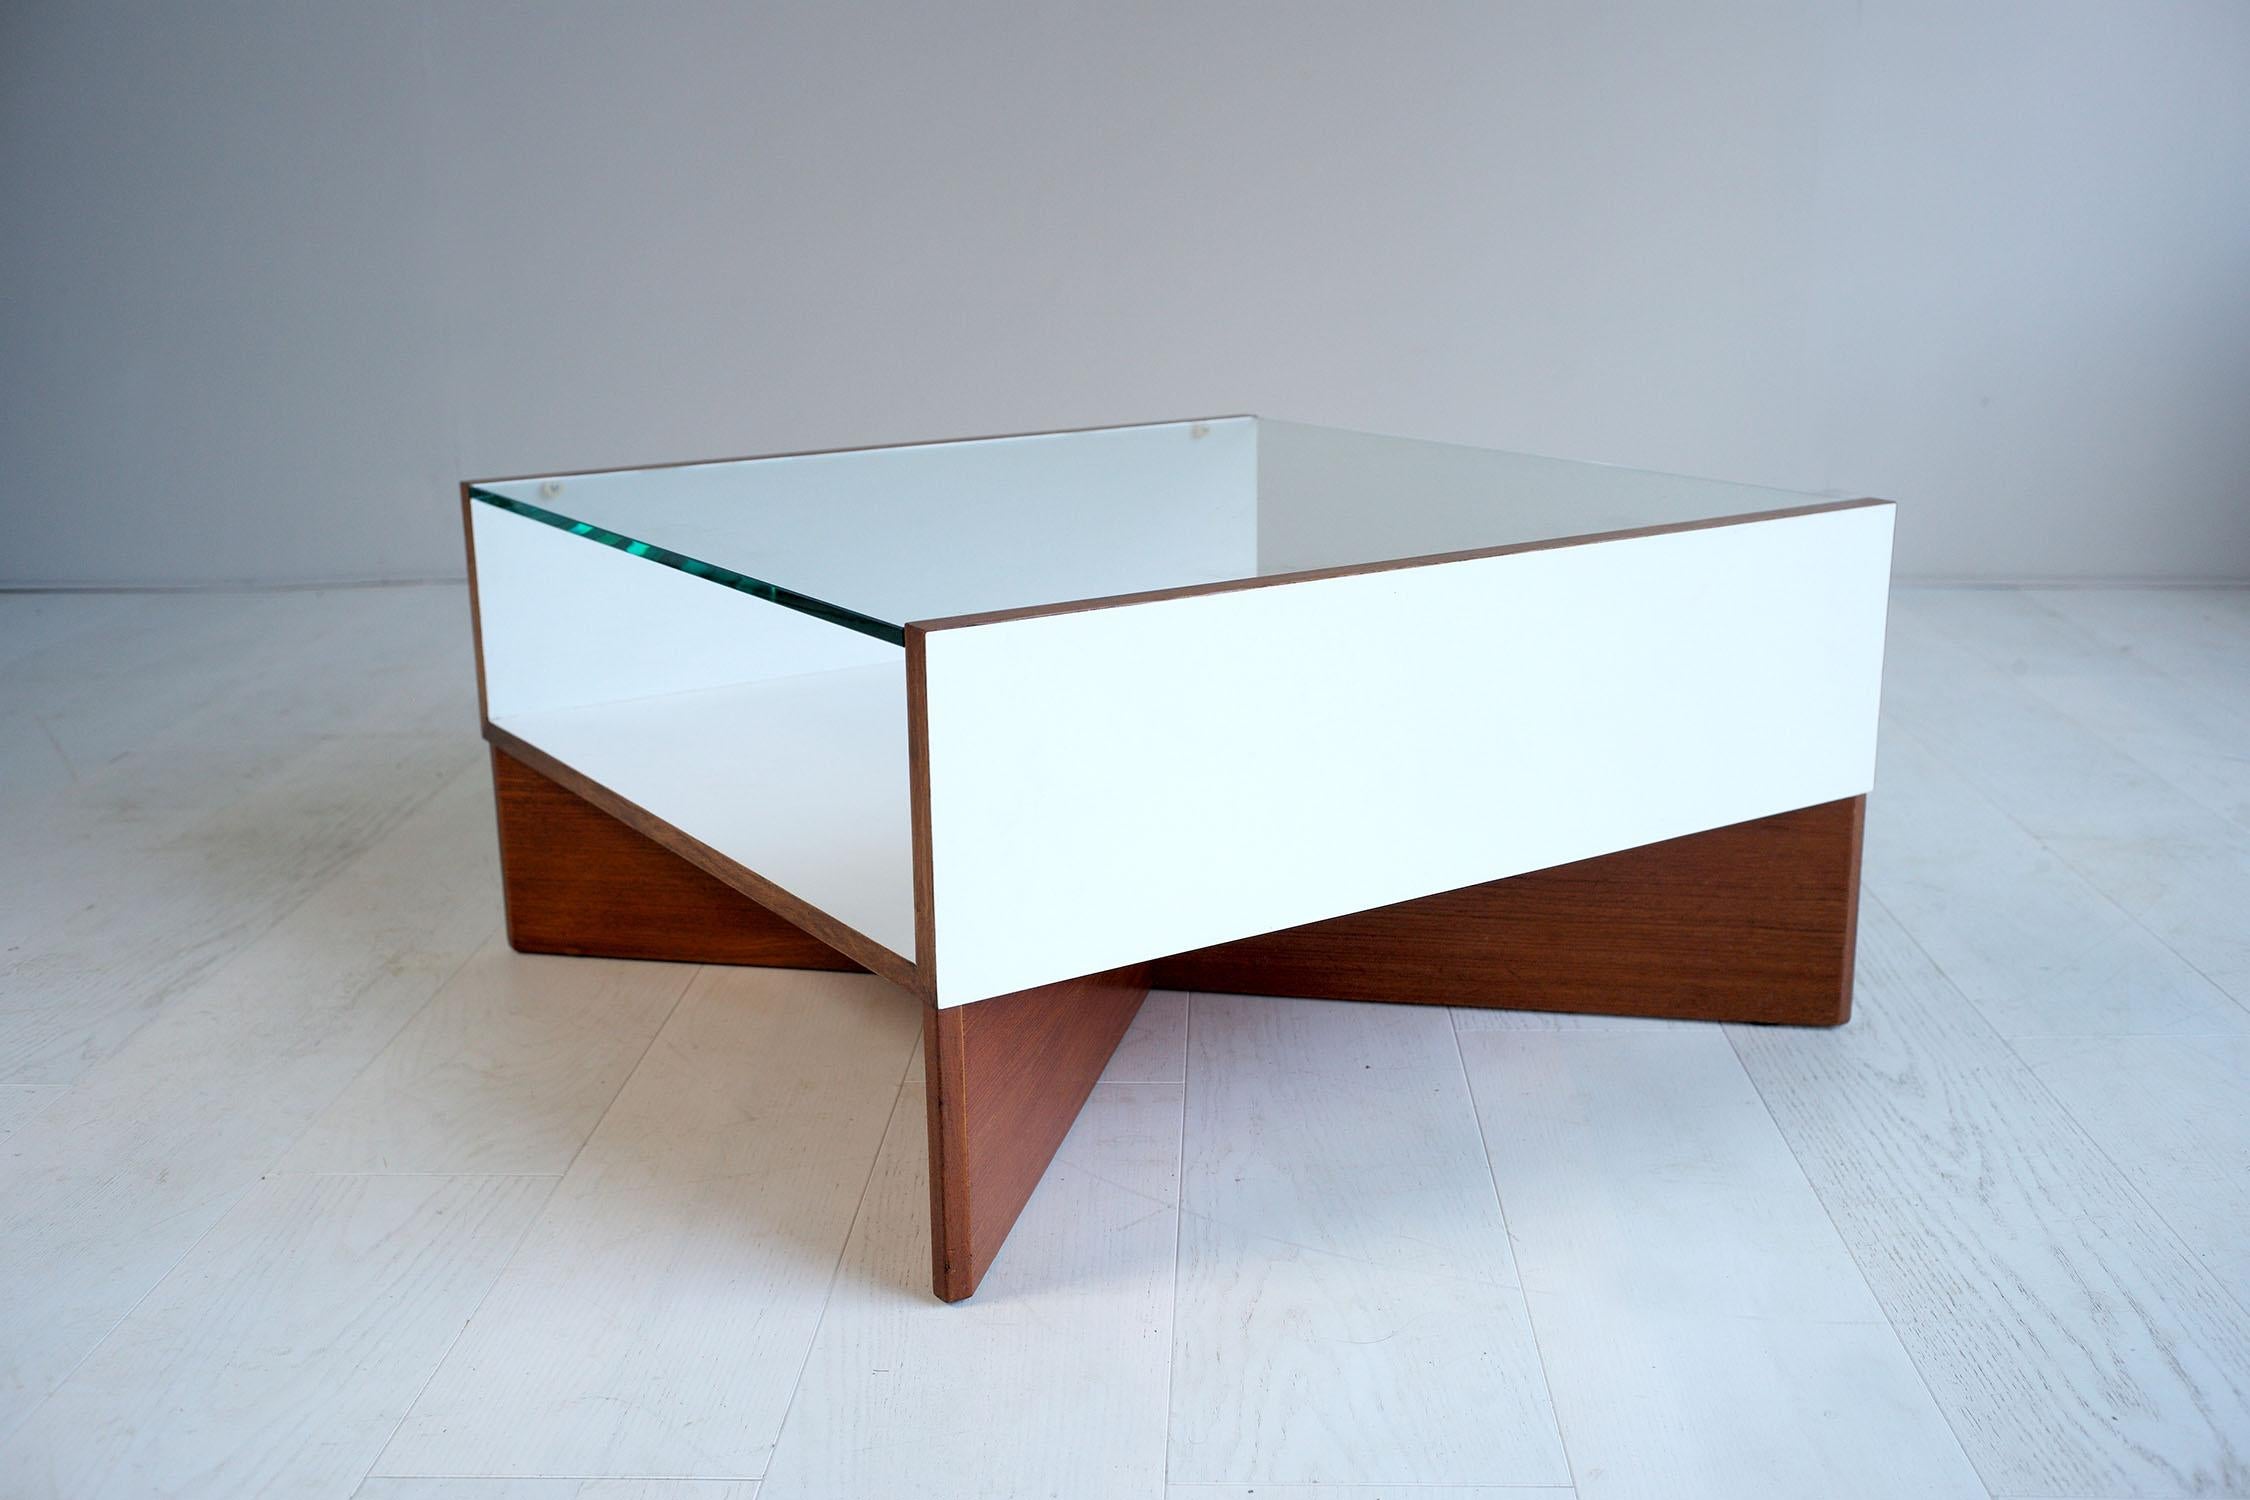 Rare Capitole coffee table, CA 21 model in teak, matte white Formica by Pierre Guariche (1926-1995) for Huchers Minvielle, France, 1960.
Cross frame, 1 cm thick glass top.
In a perfect state.
 